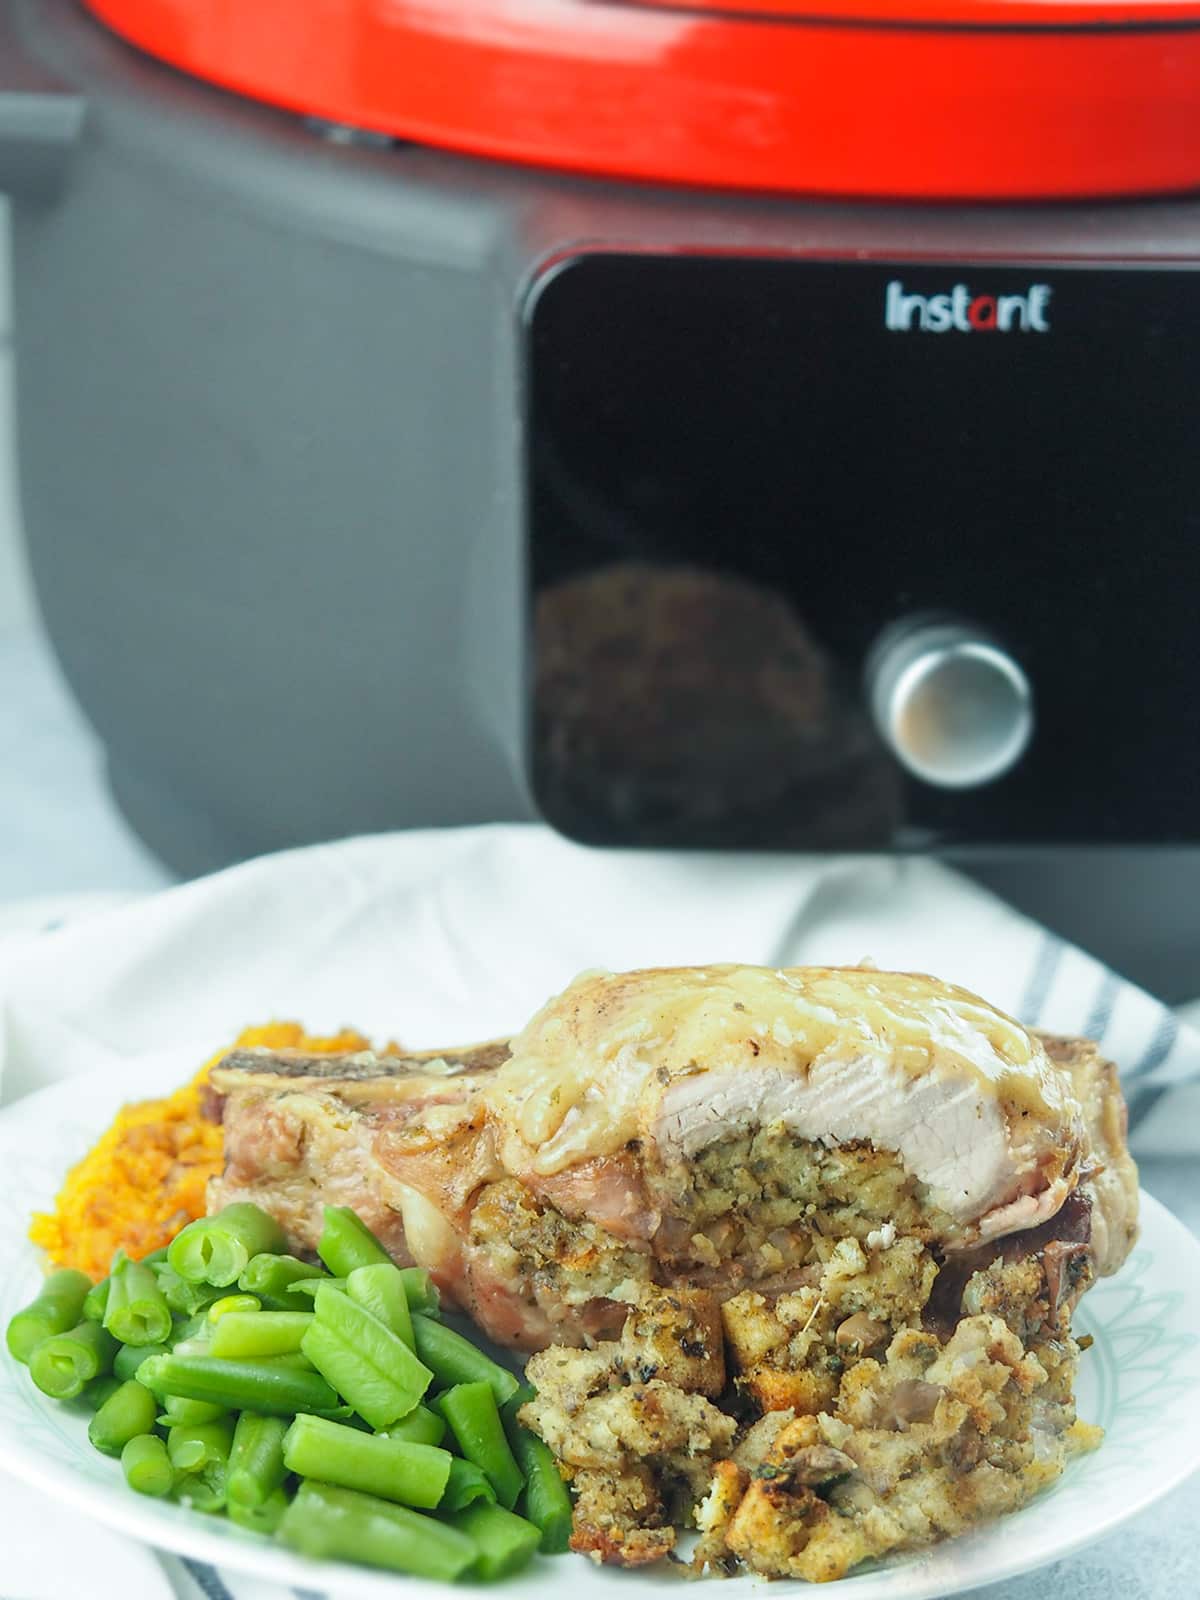 Instant Dutch Oven Stuffed Pork Chops - Monday Is Meatloaf